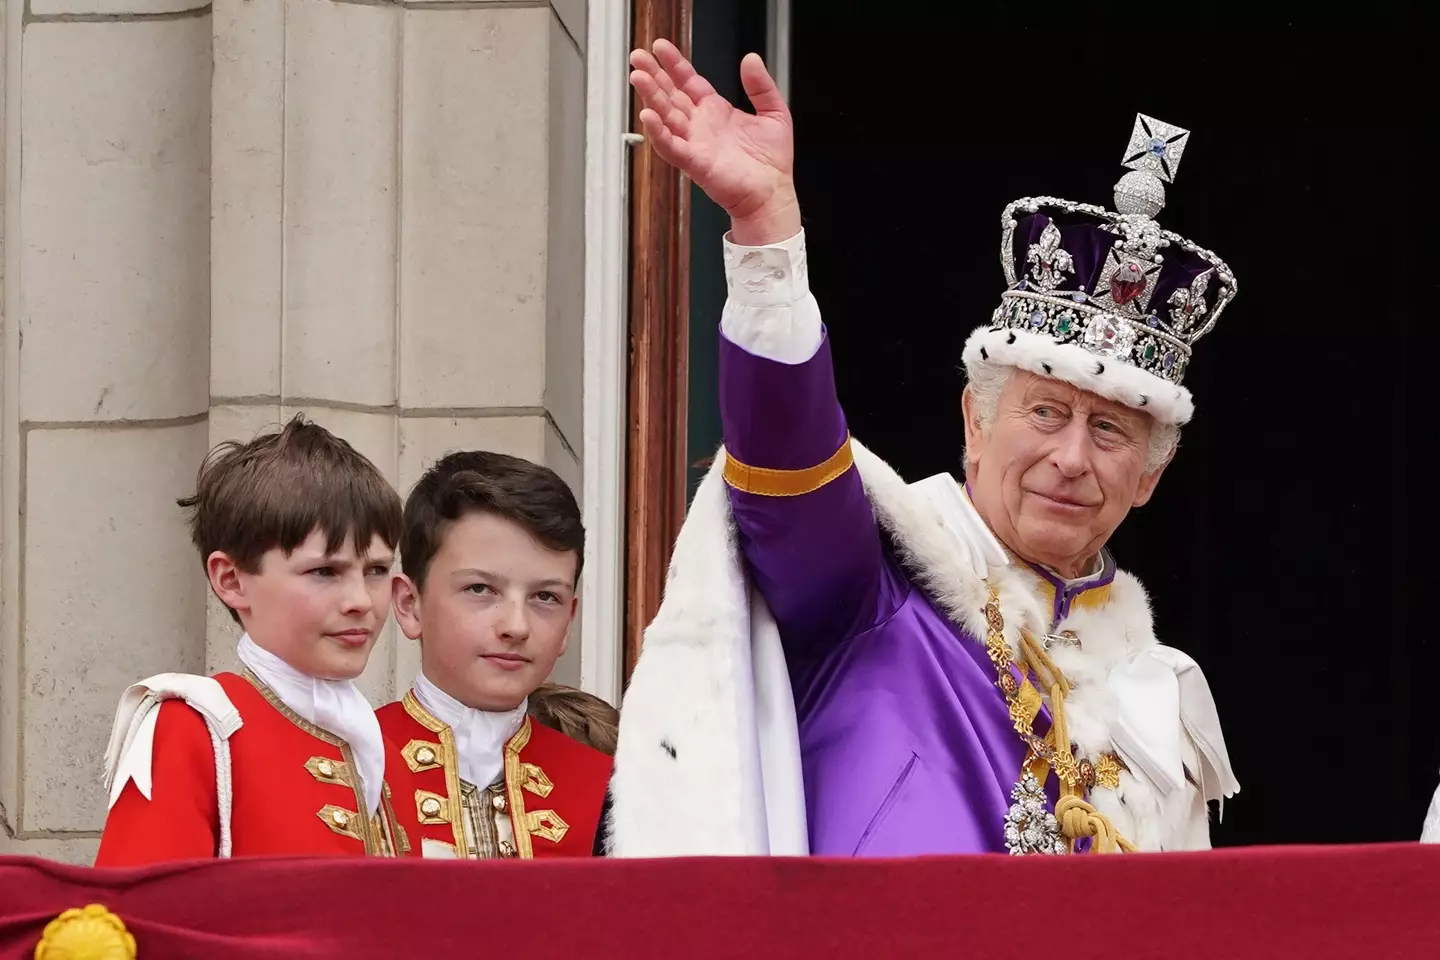 The concert to celebrate King Charles' coronation is this evening.